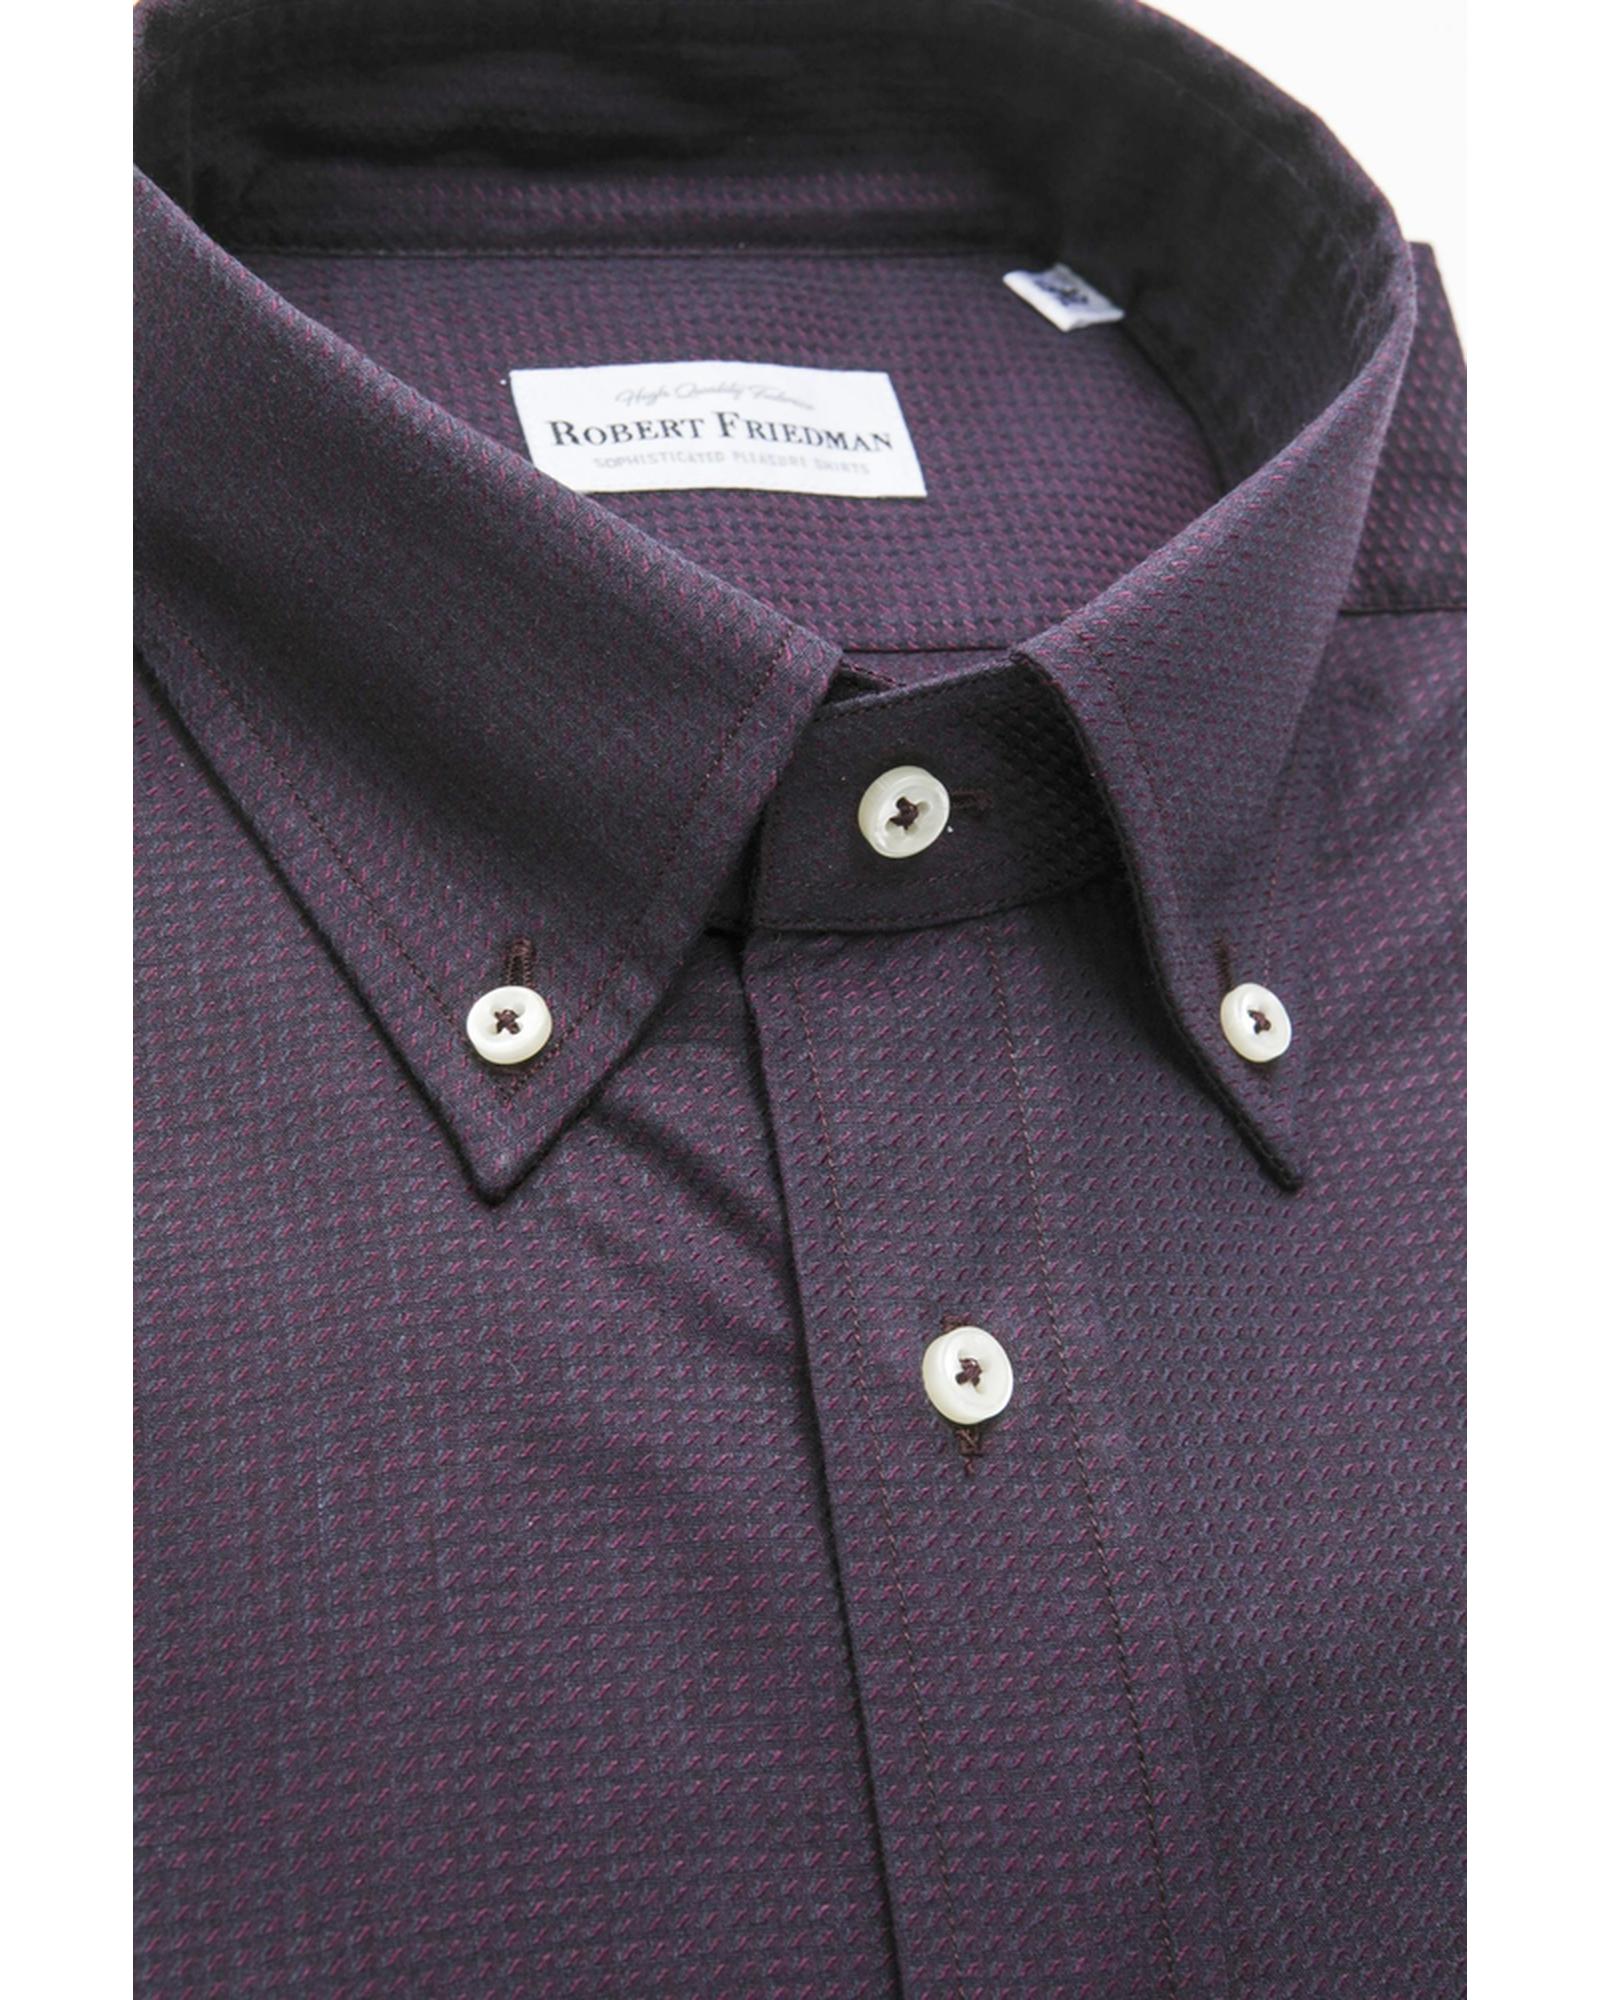 Classic Button Down Shirt for Effortless Style 40 IT Men